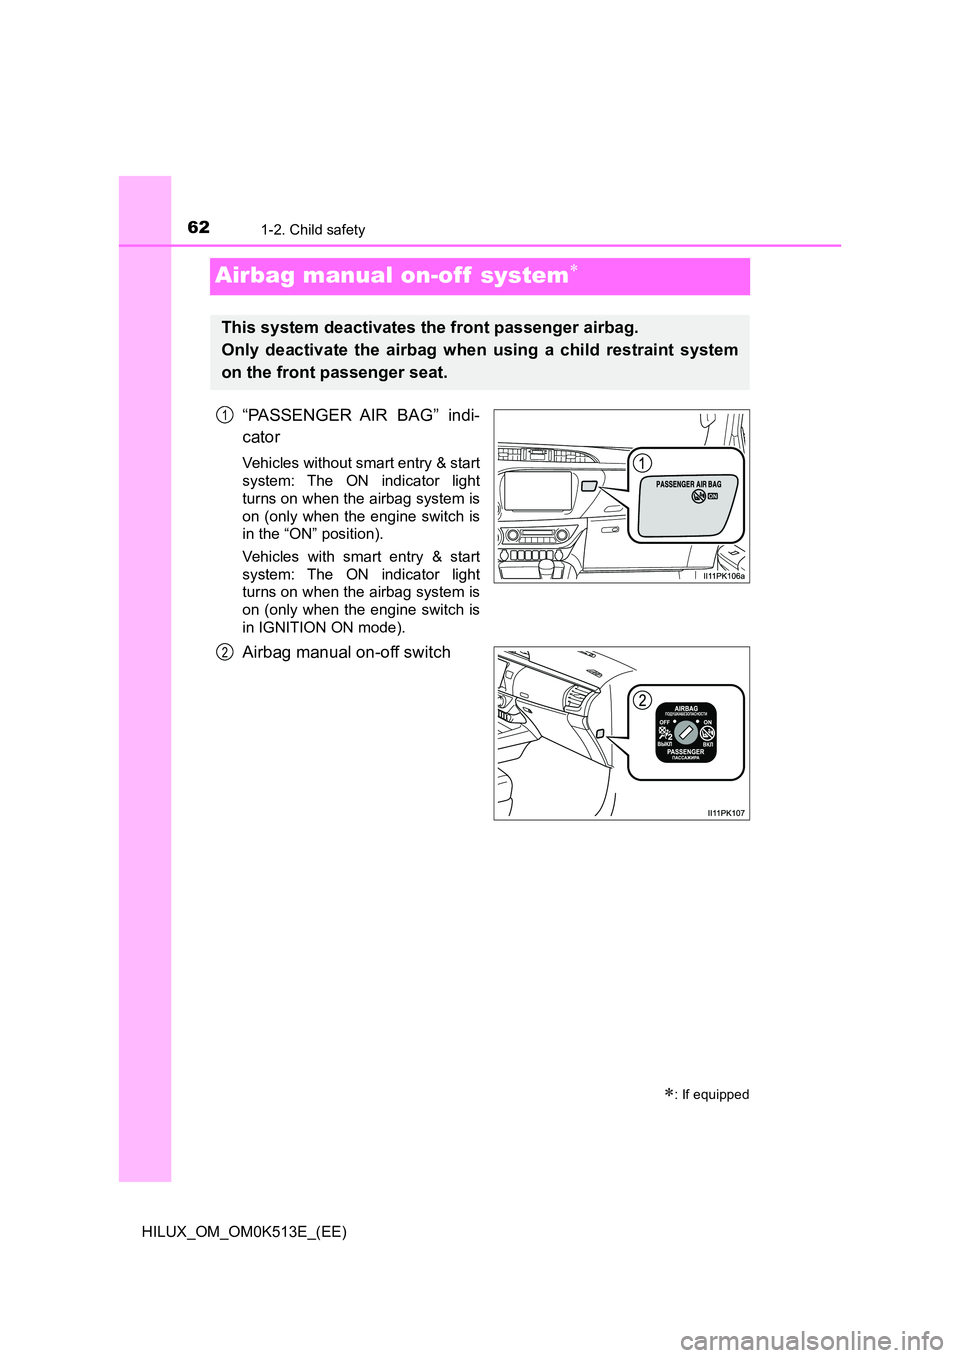 TOYOTA HILUX 2021  Owners Manual (in English) 621-2. Child safety
HILUX_OM_OM0K513E_(EE)
Airbag manual on-off  system
“PASSENGER AIR BAG” indi- 
cator
Vehicles without smart entry & start 
system: The ON indicator light 
turns on when the 